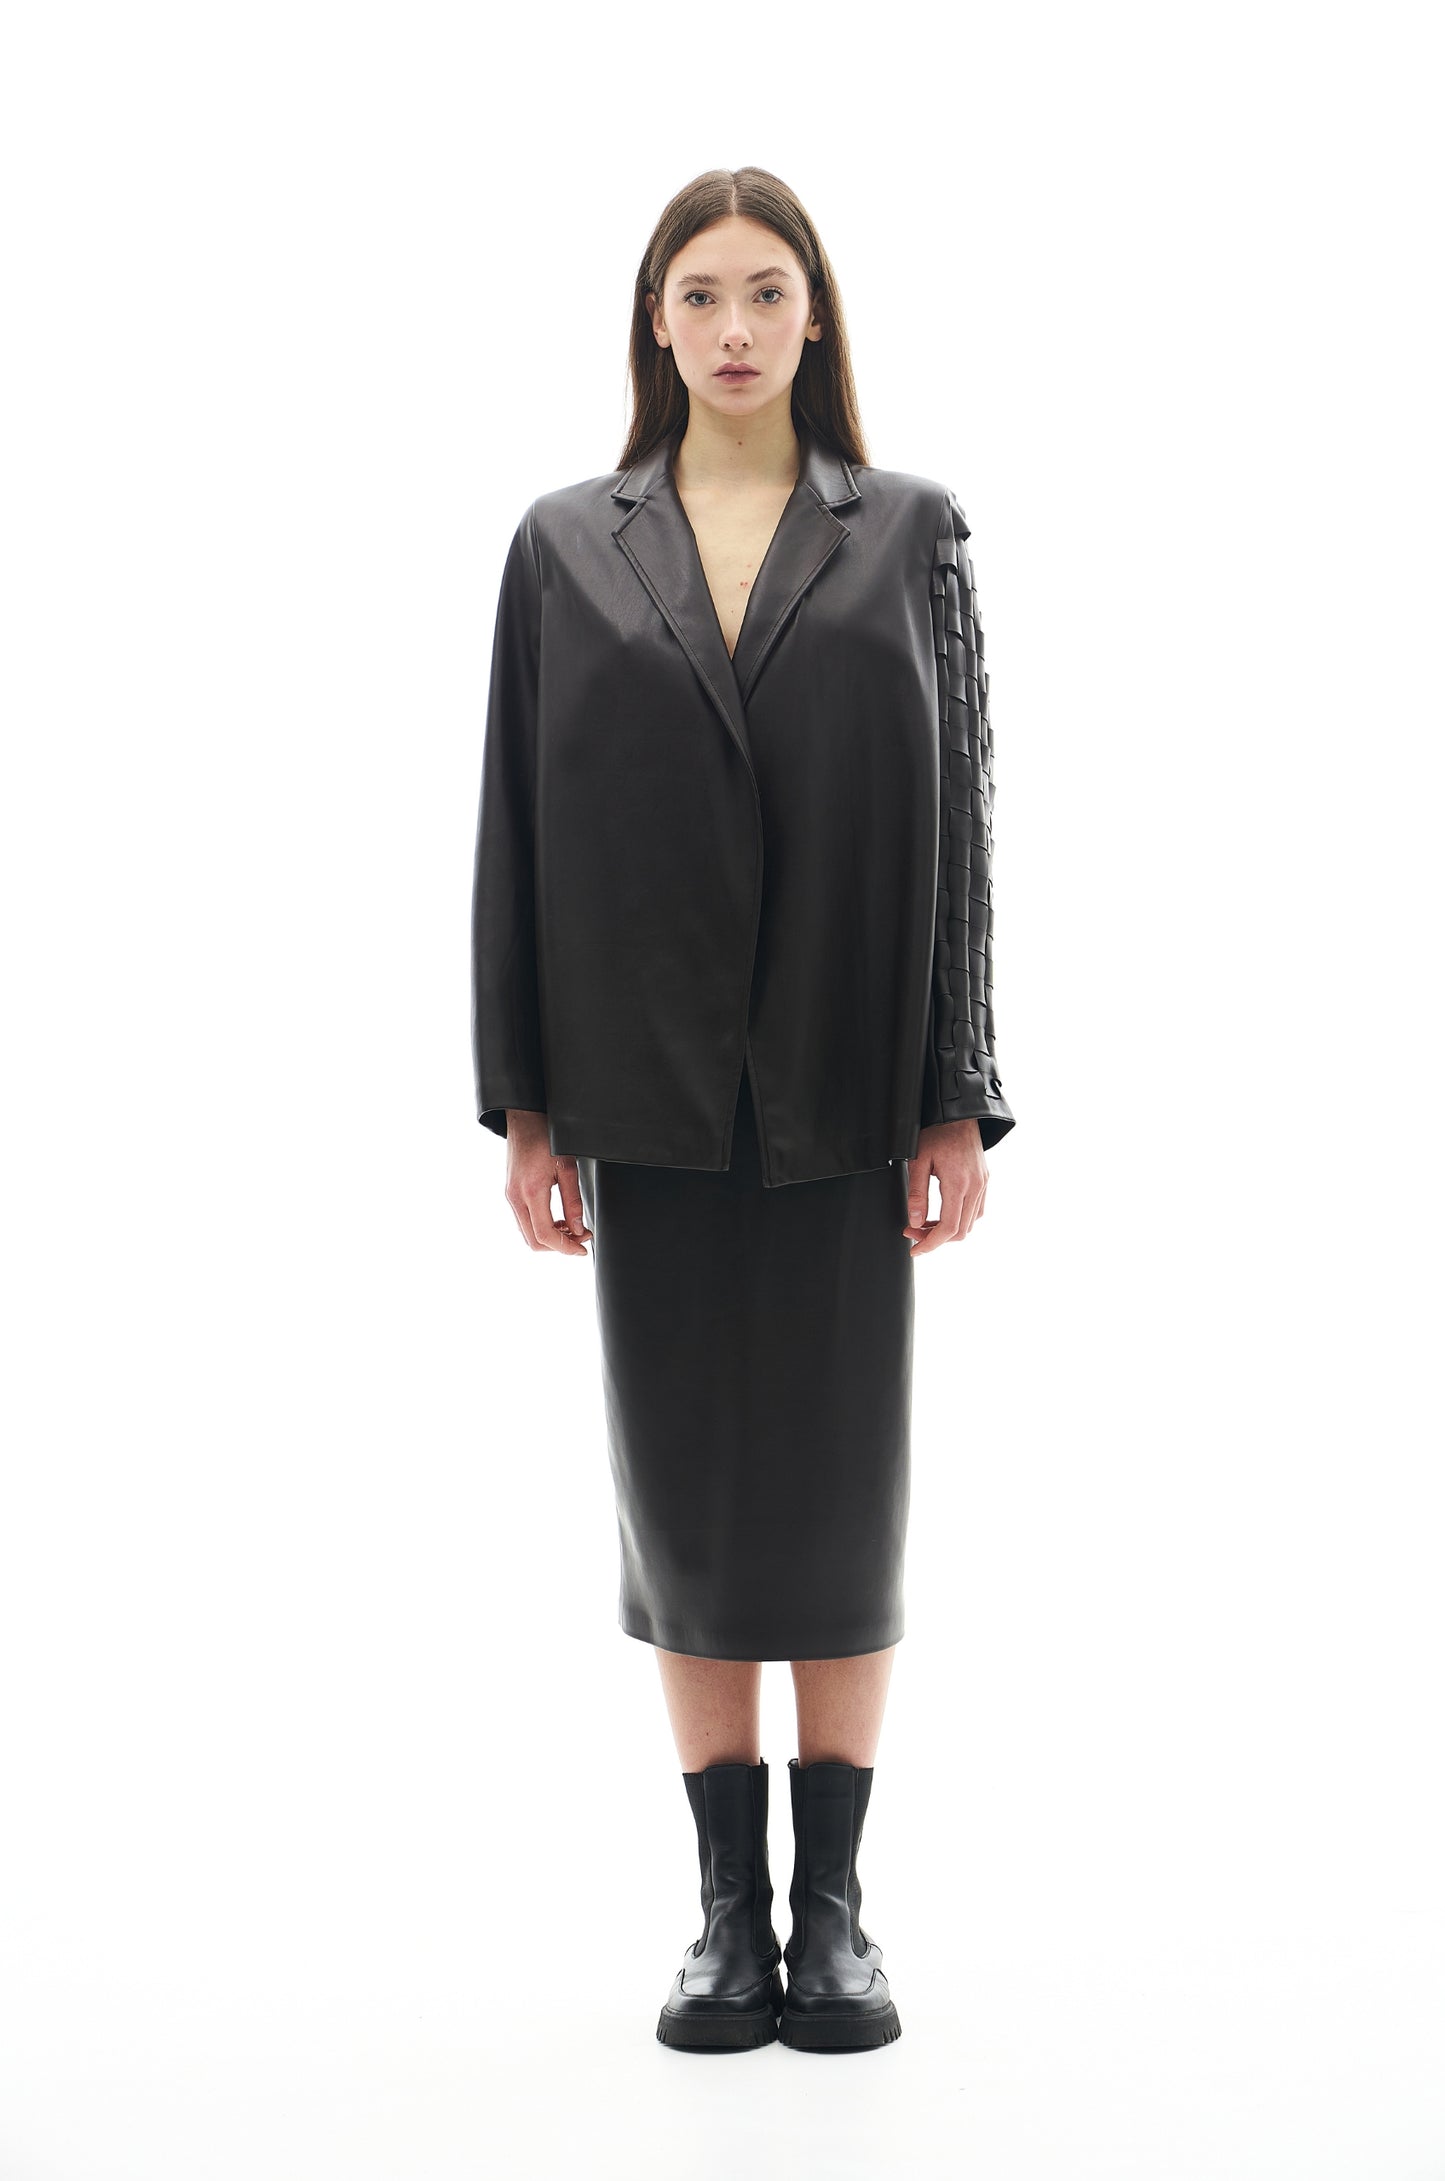 Black eco leather boxy jacket with weaving detail for women by Holocene